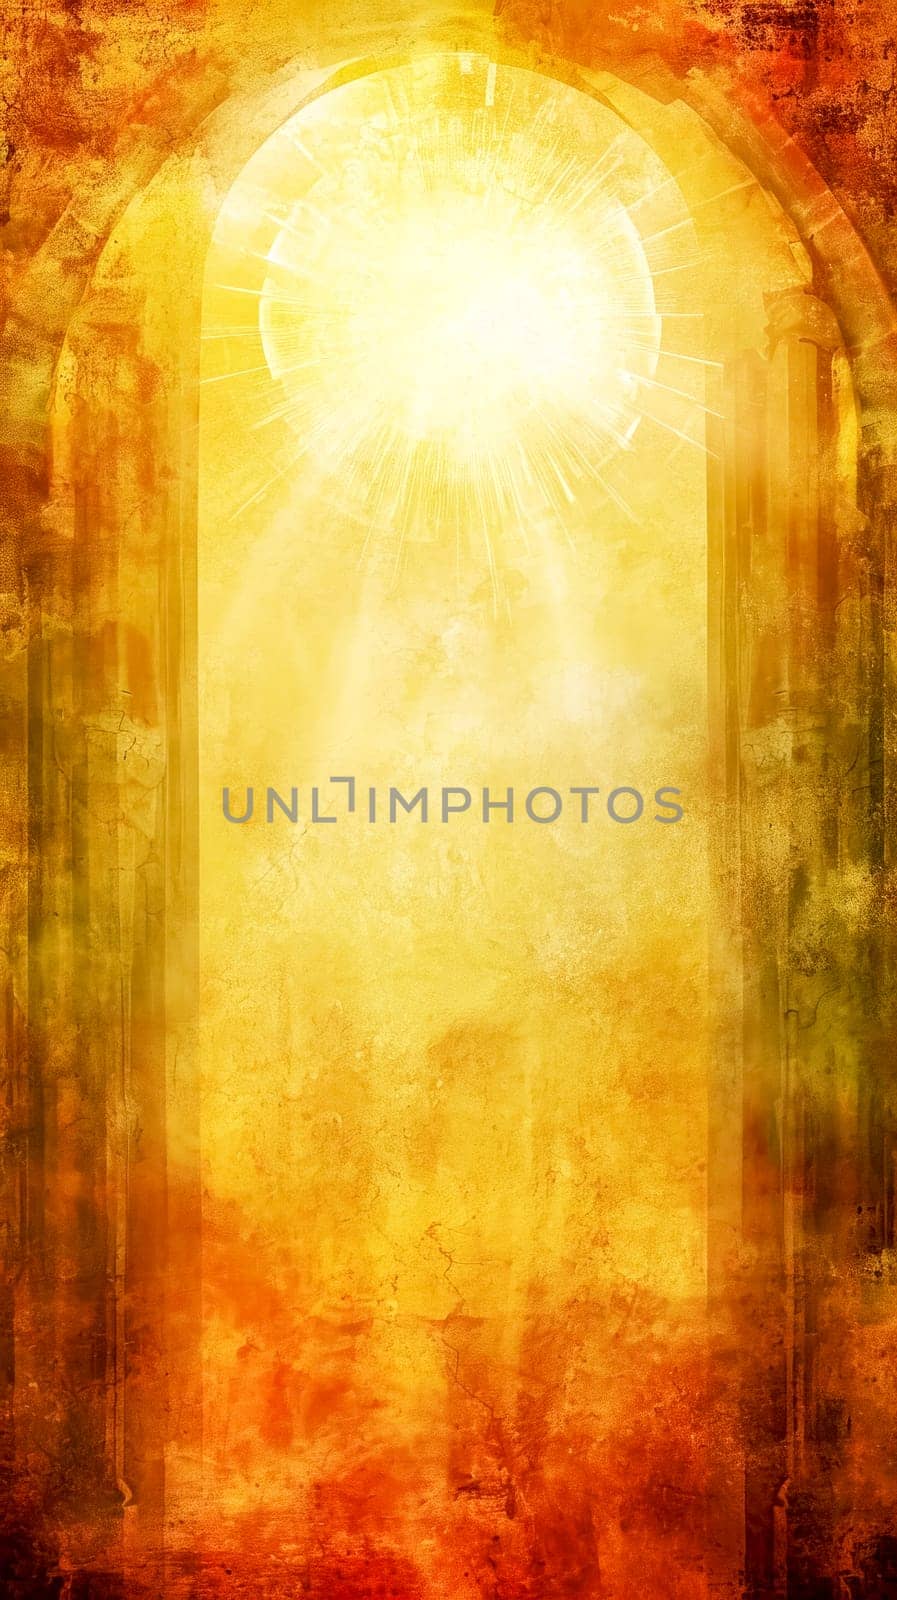 light emanating from an arched doorway, creating an intense and warm glow that symbolizes enlightenment, guidance, and a passage to the divine, textured golden backdrop, wisdom and spiritual awakening by Edophoto